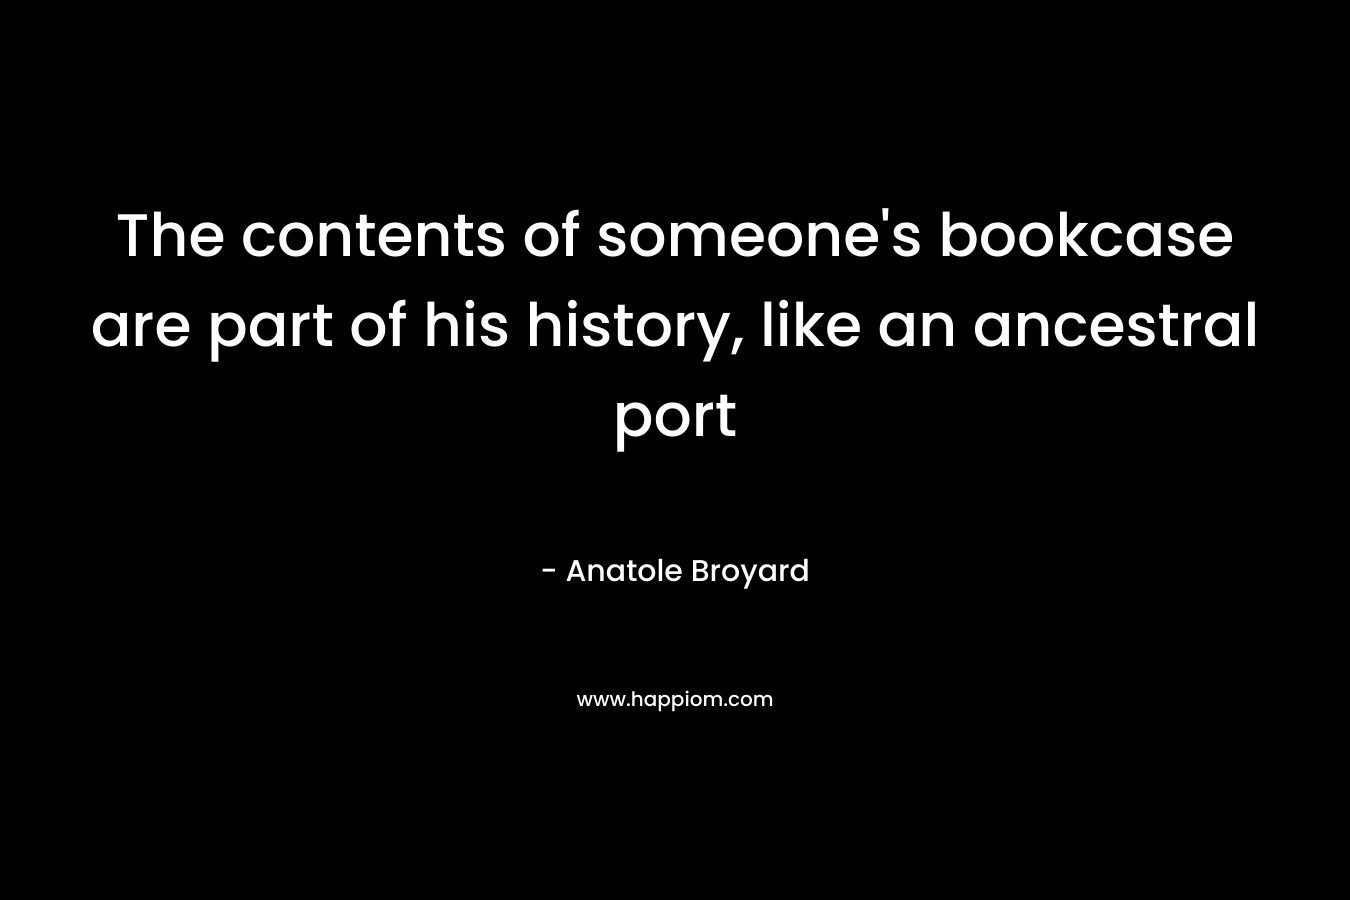 The contents of someone’s bookcase are part of his history, like an ancestral port – Anatole Broyard